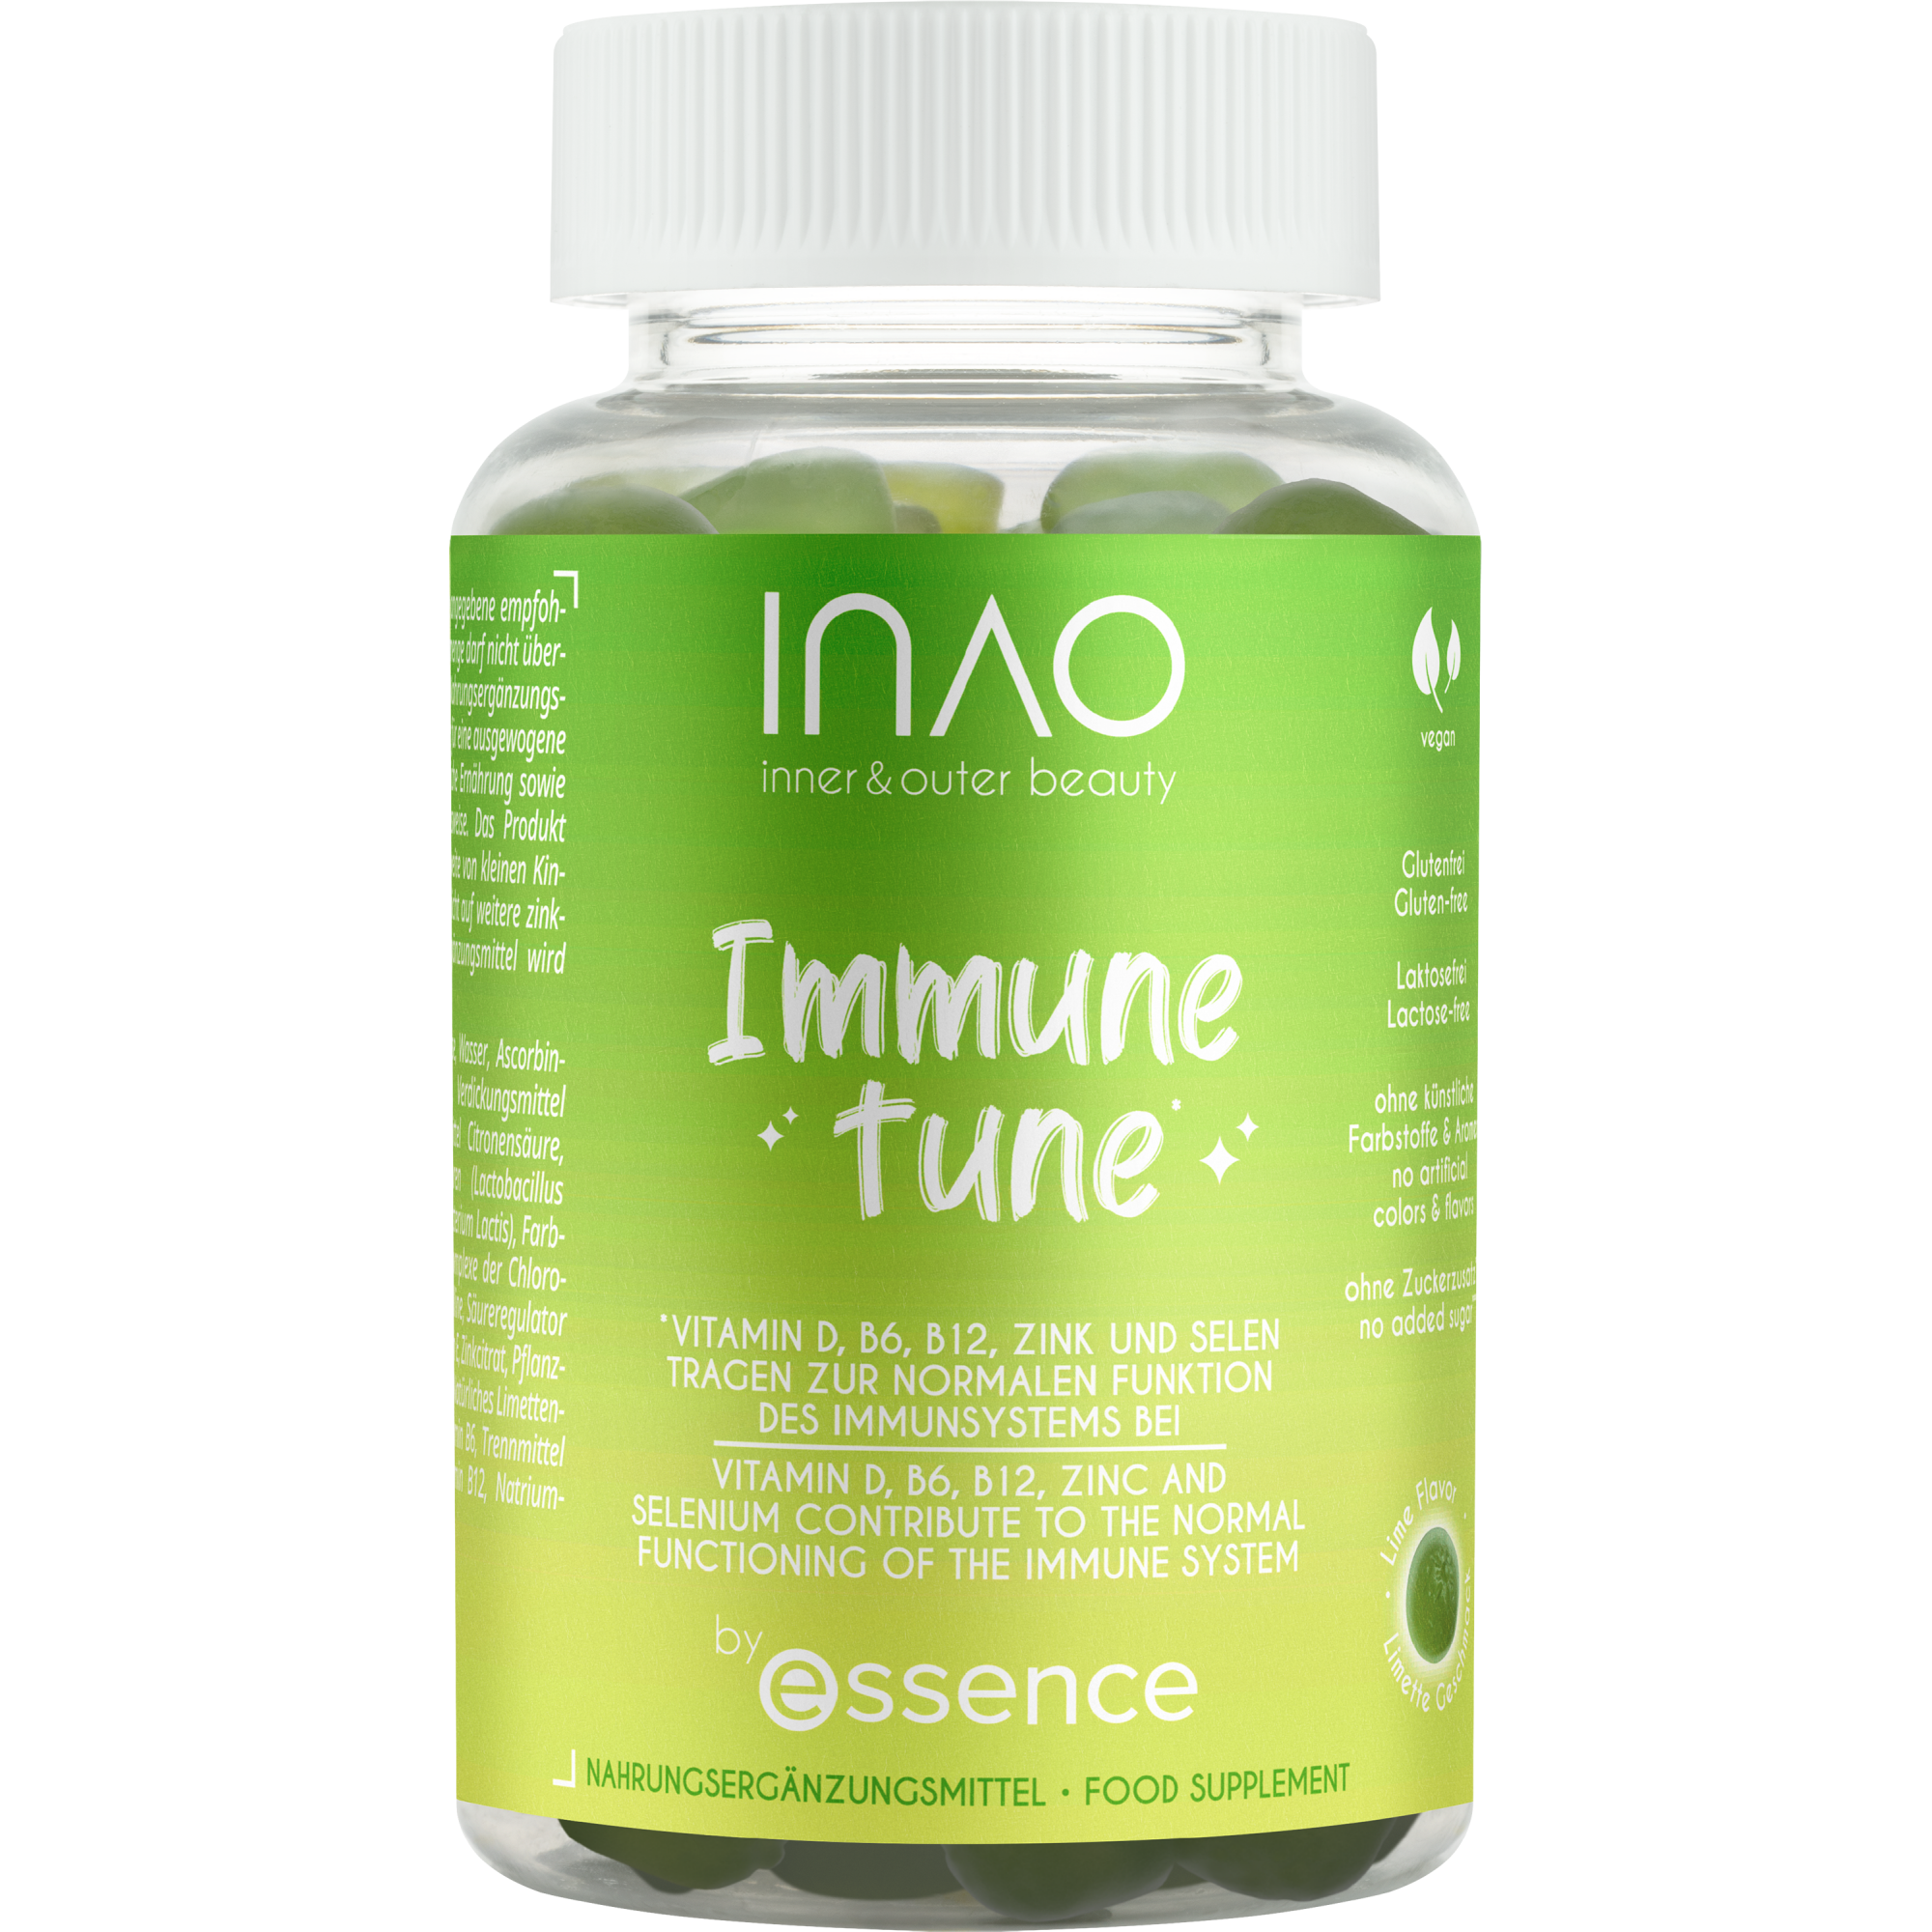 INAO inner and outer beauty Immune Tune gummies by essence